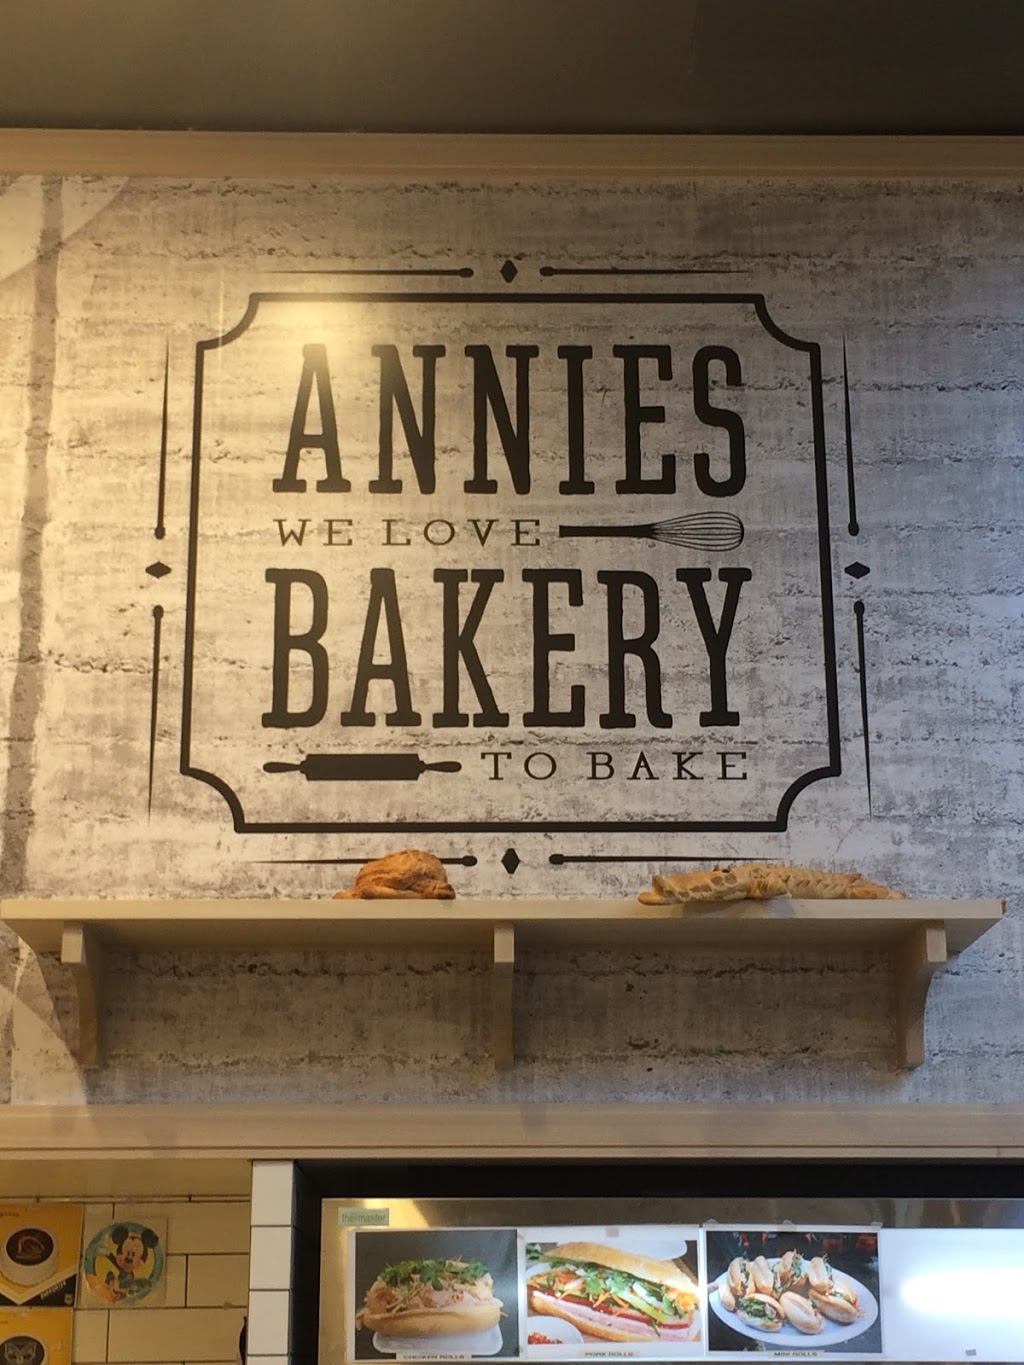 Annies Bakery | bakery | Shop T8/799 Richmond Rd, Colebee NSW 2761, Australia | 0405090440 OR +61 405 090 440